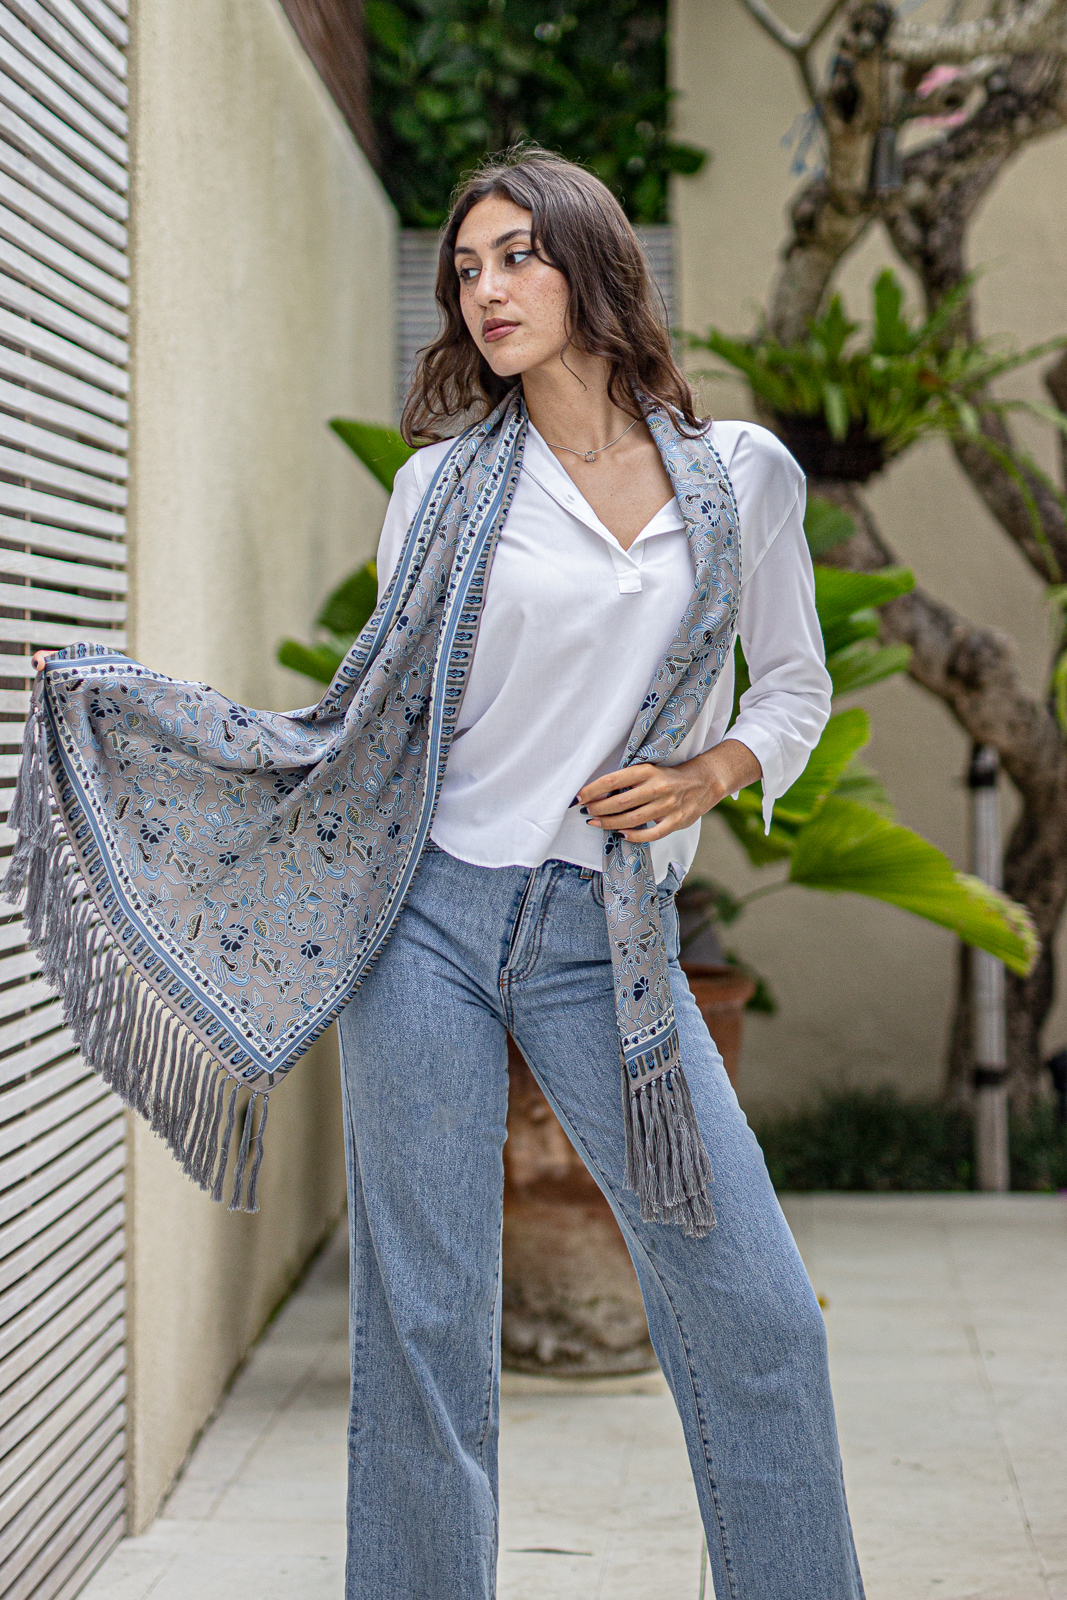 Shawl In Singapore Grey in Model 3rd Pose